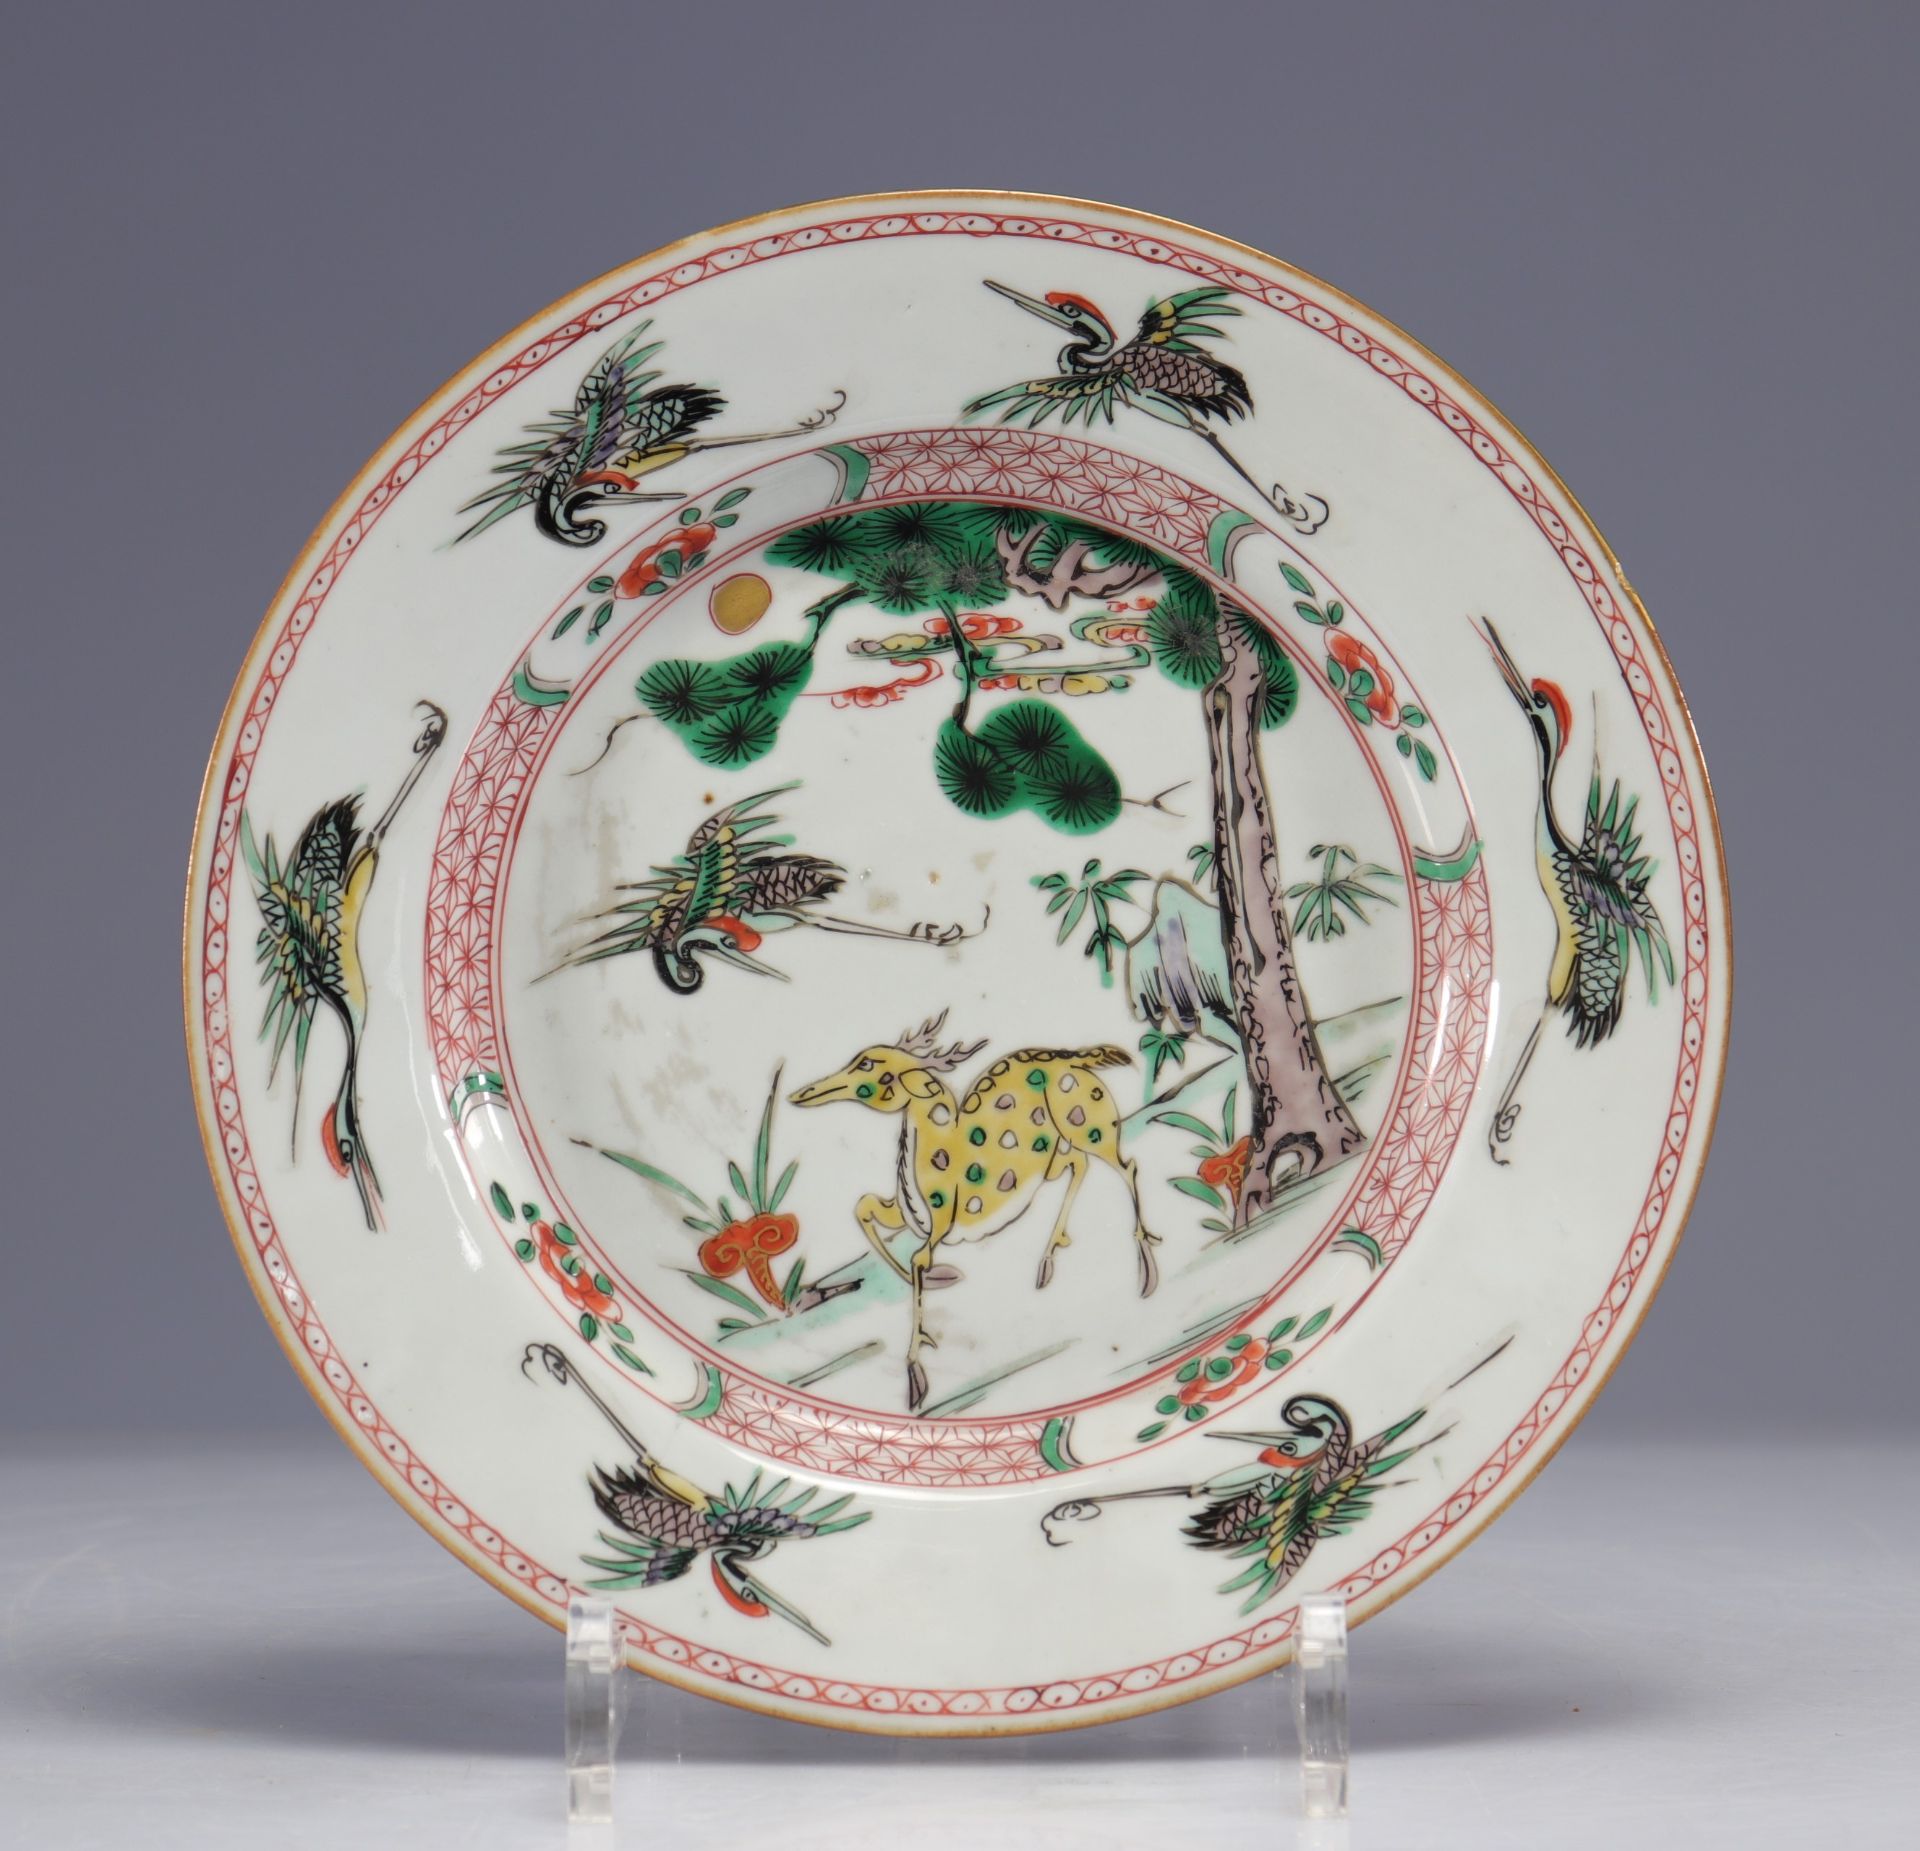 Porcelain plate decorated with deer Kangxi period